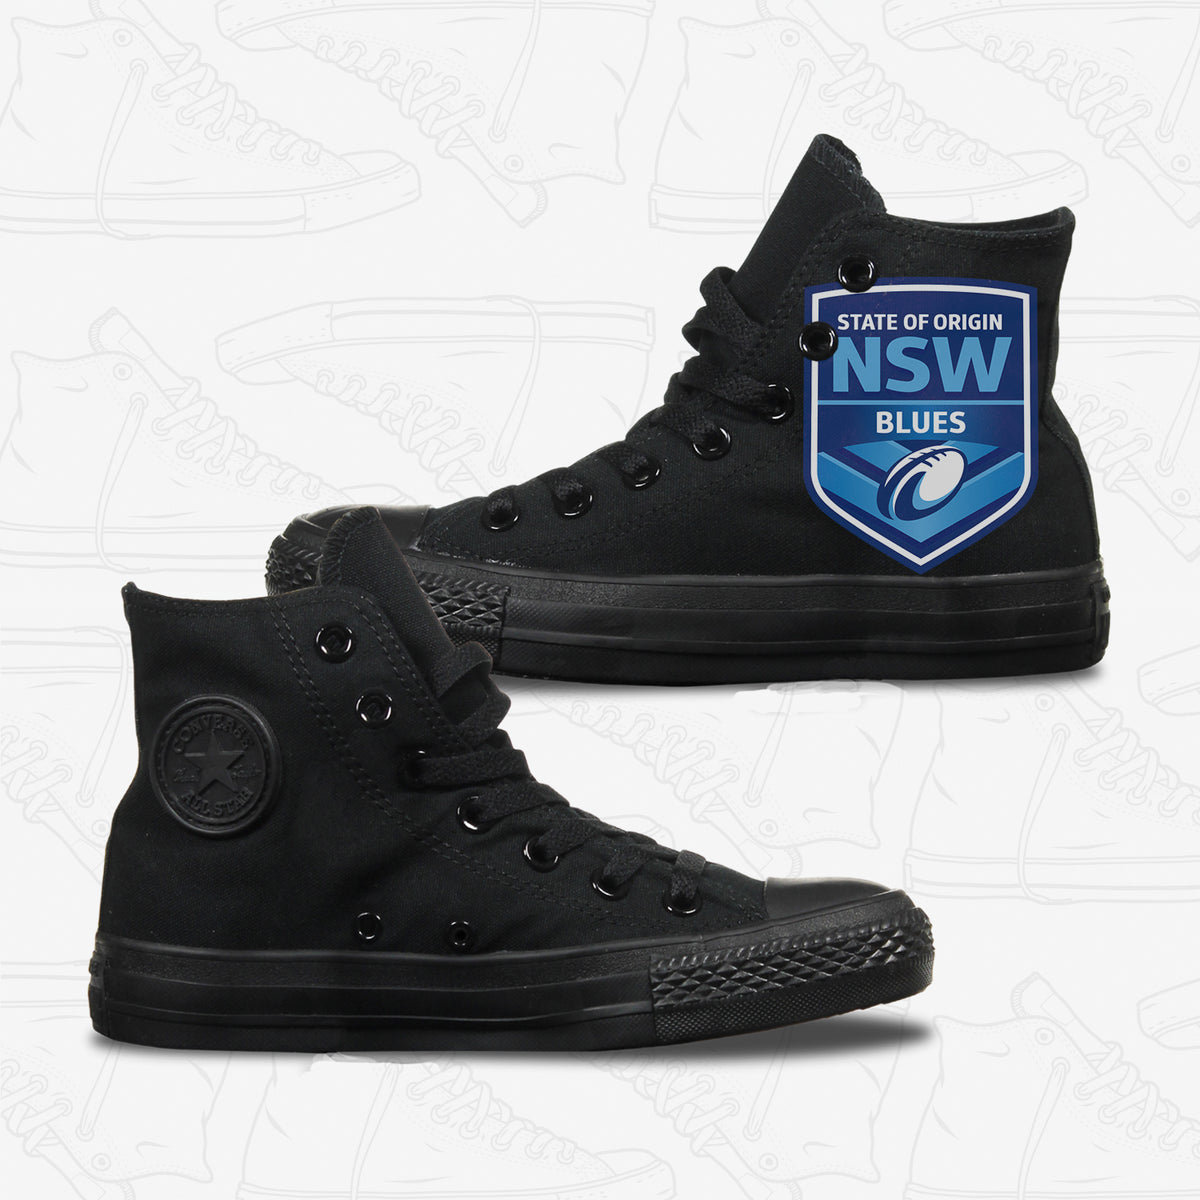 NSW State of Origin Adult Converse Shoes